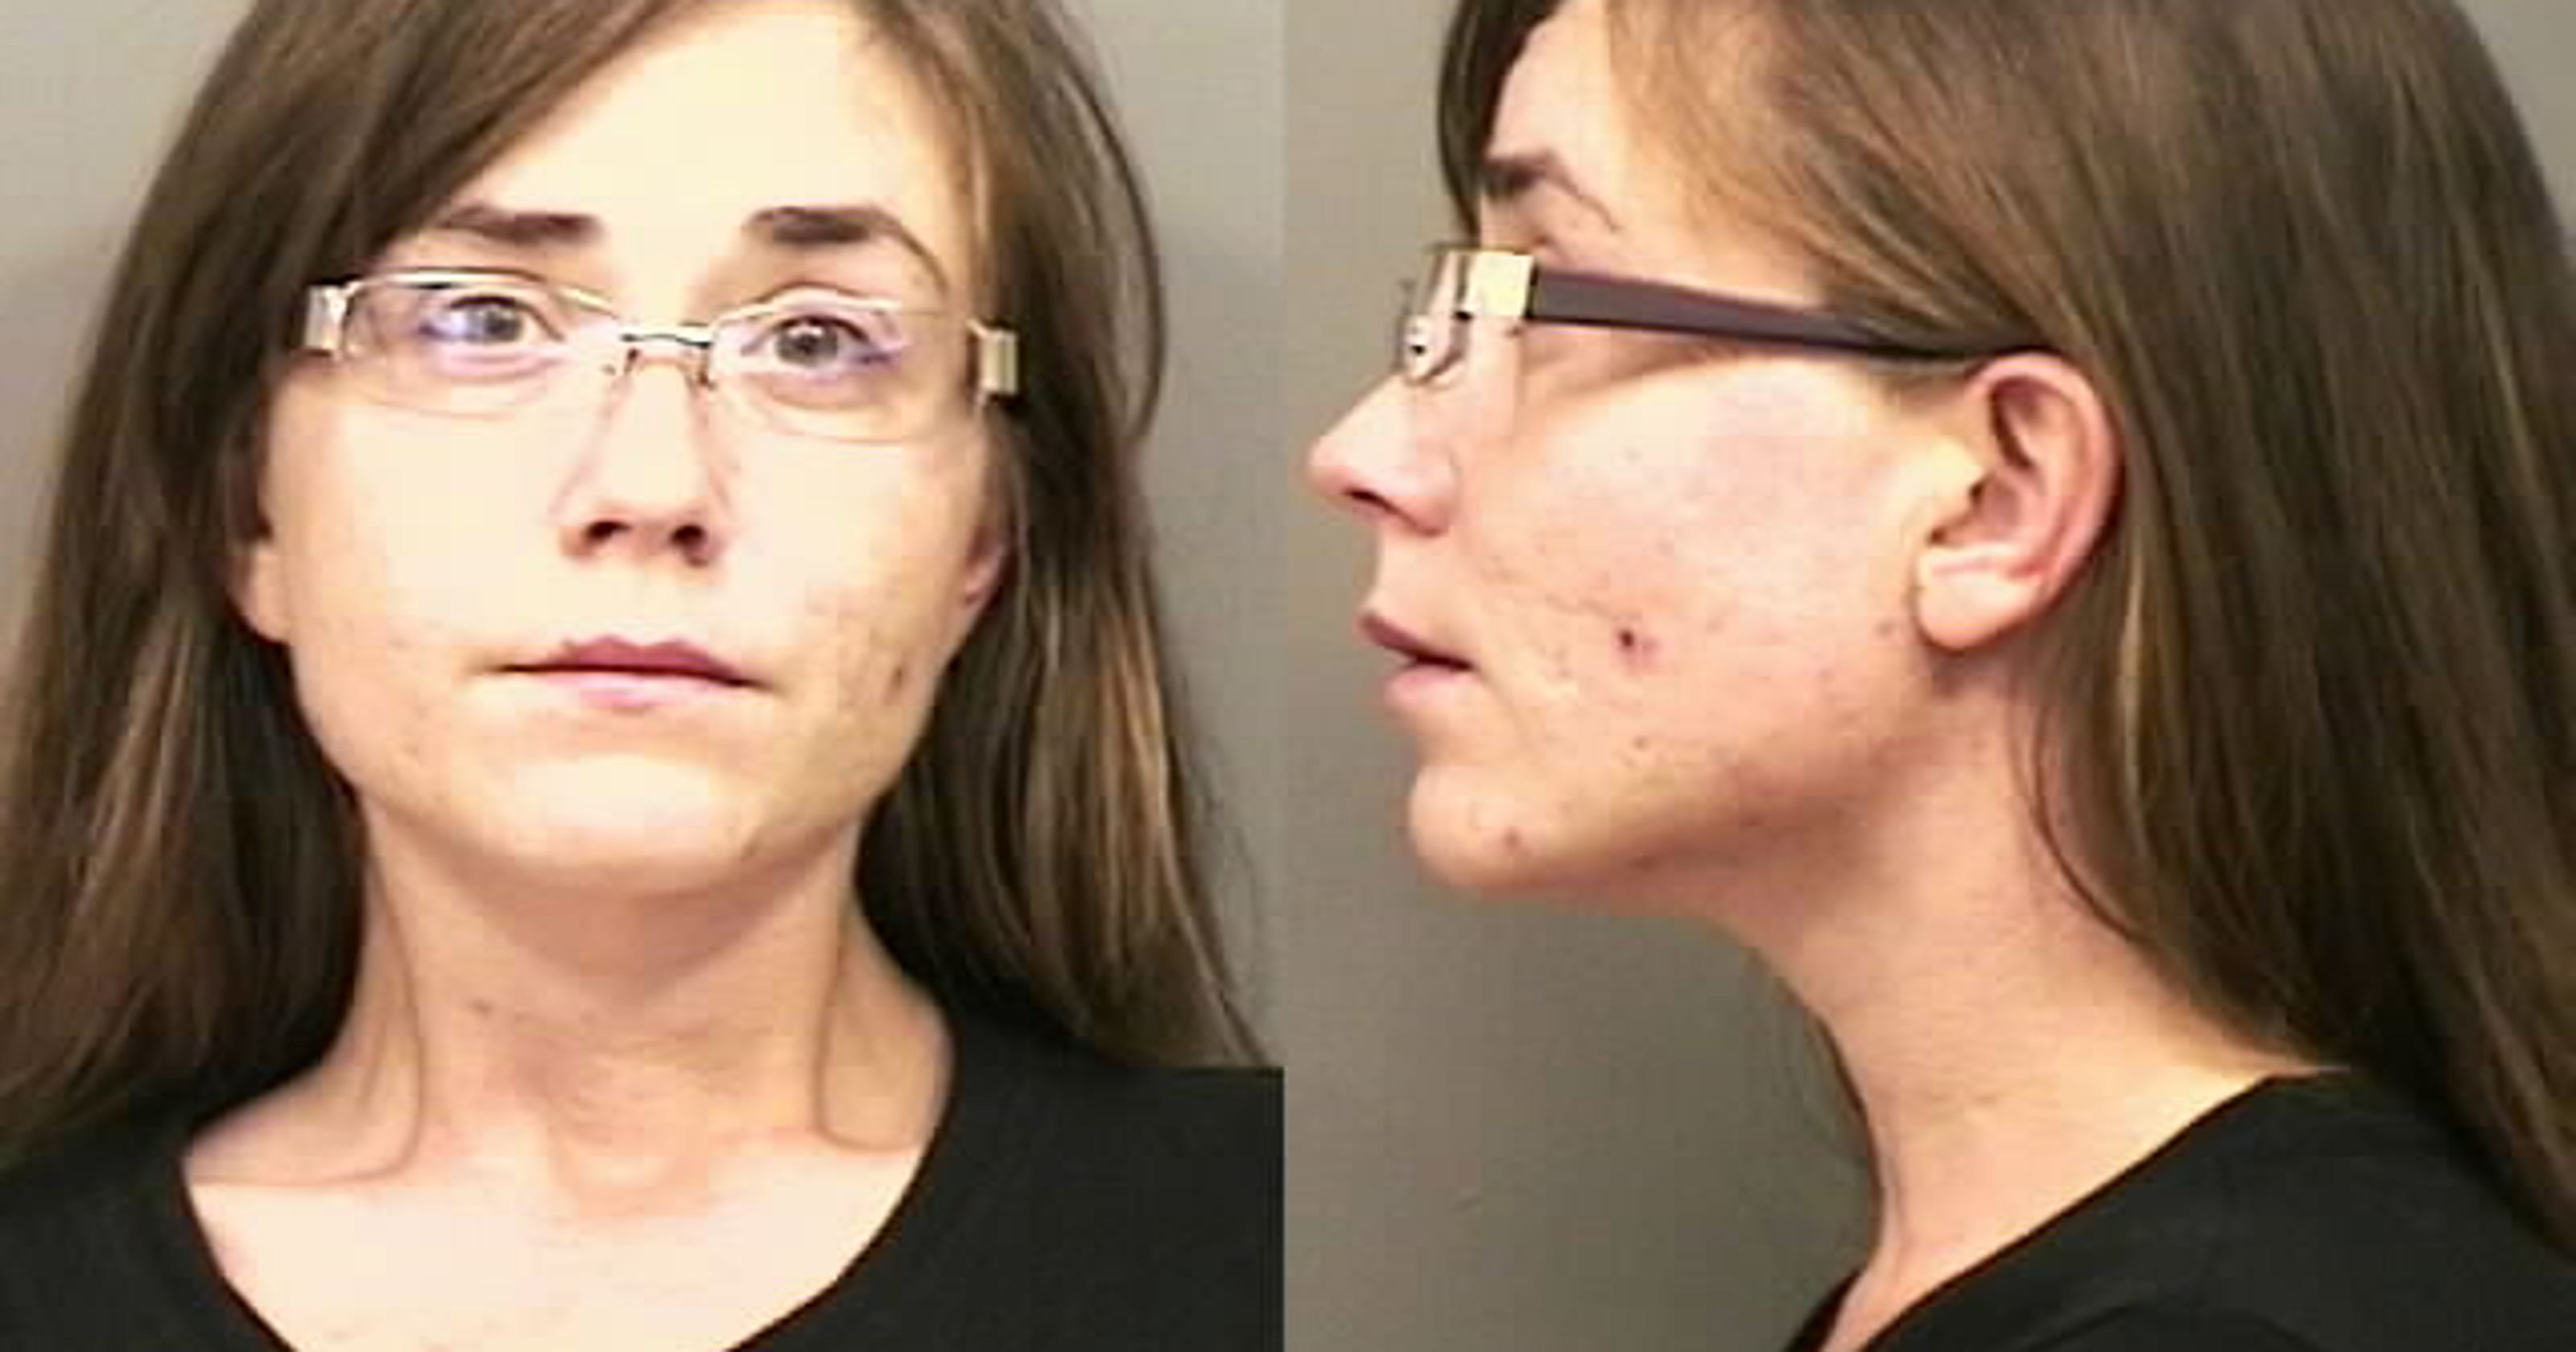 Clarksville Woman Accused Of Blackmailing Man Over Affair 